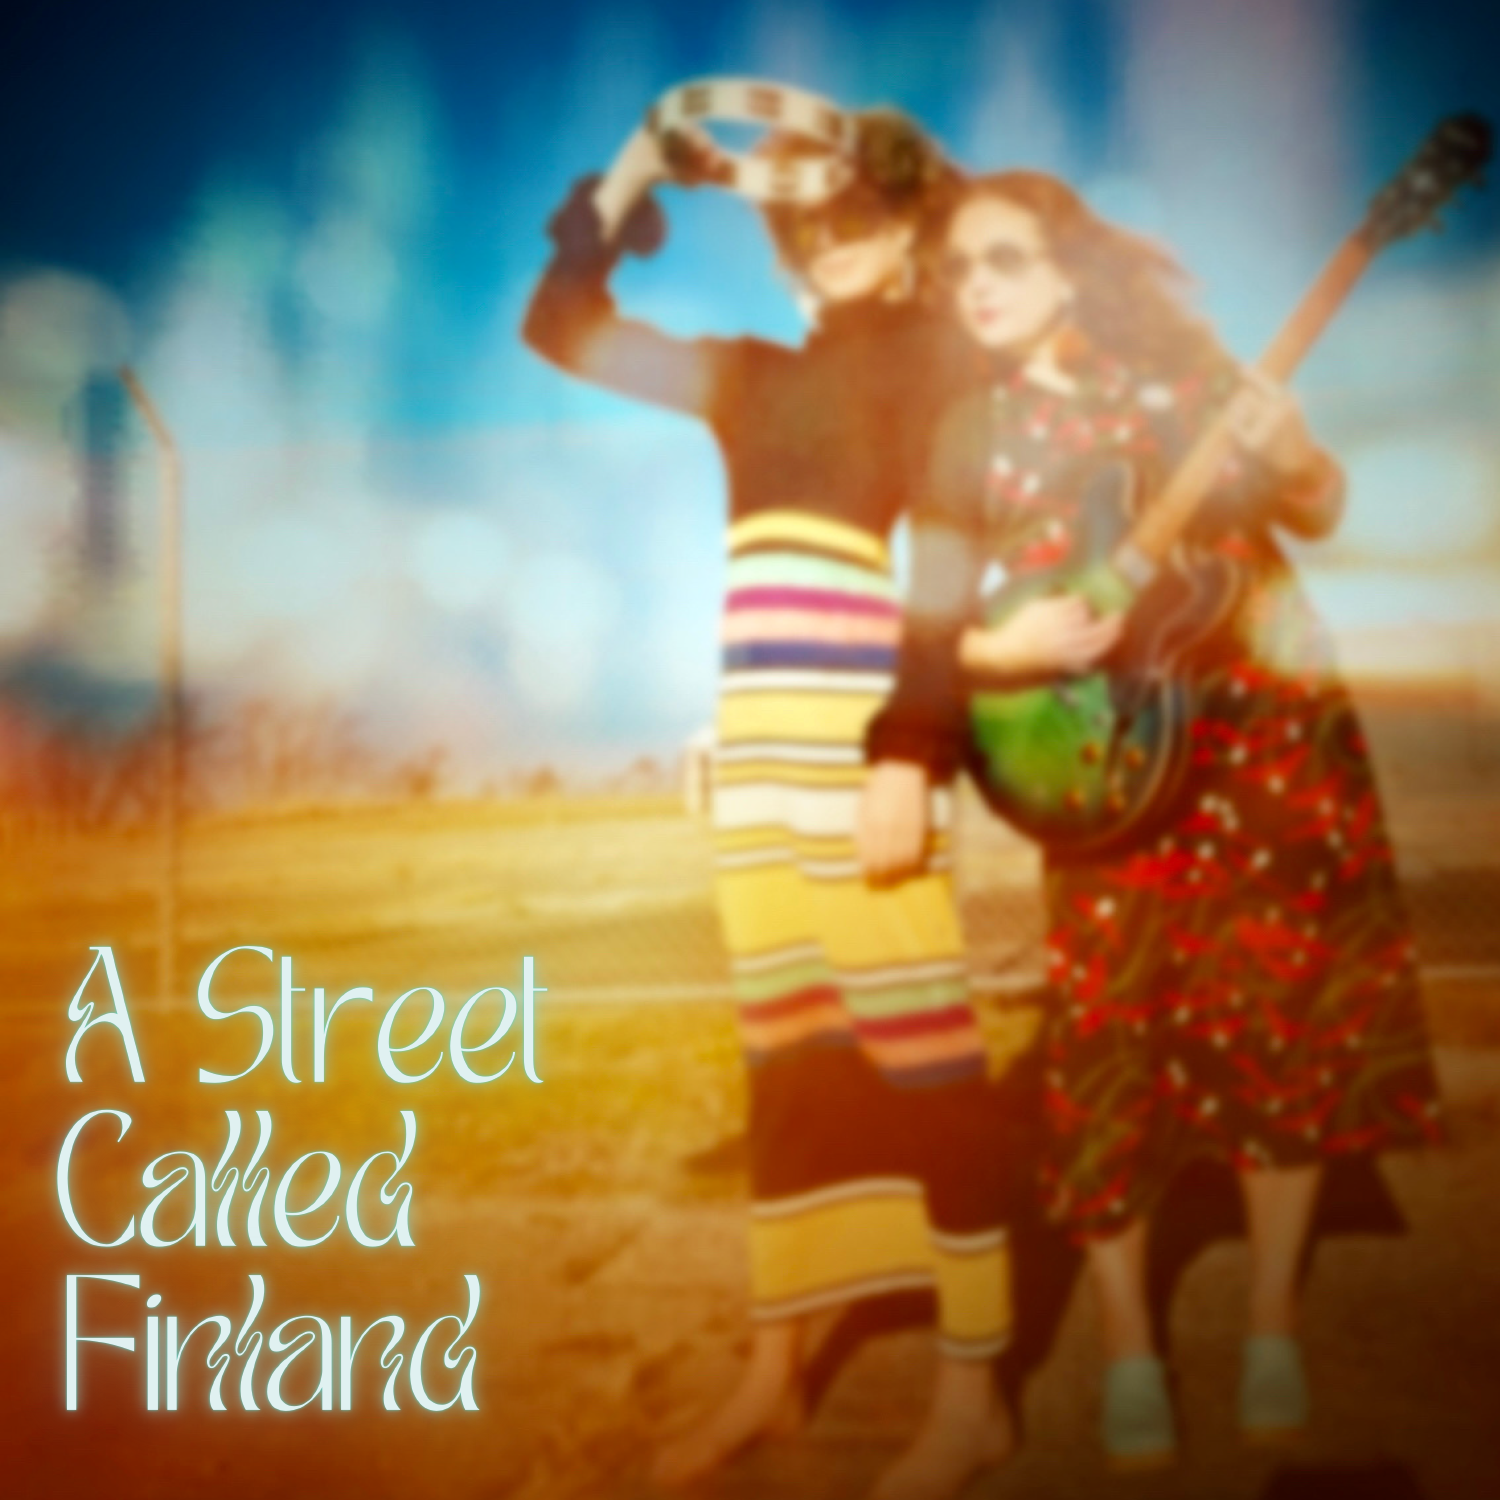 A Street Called Finland song art with